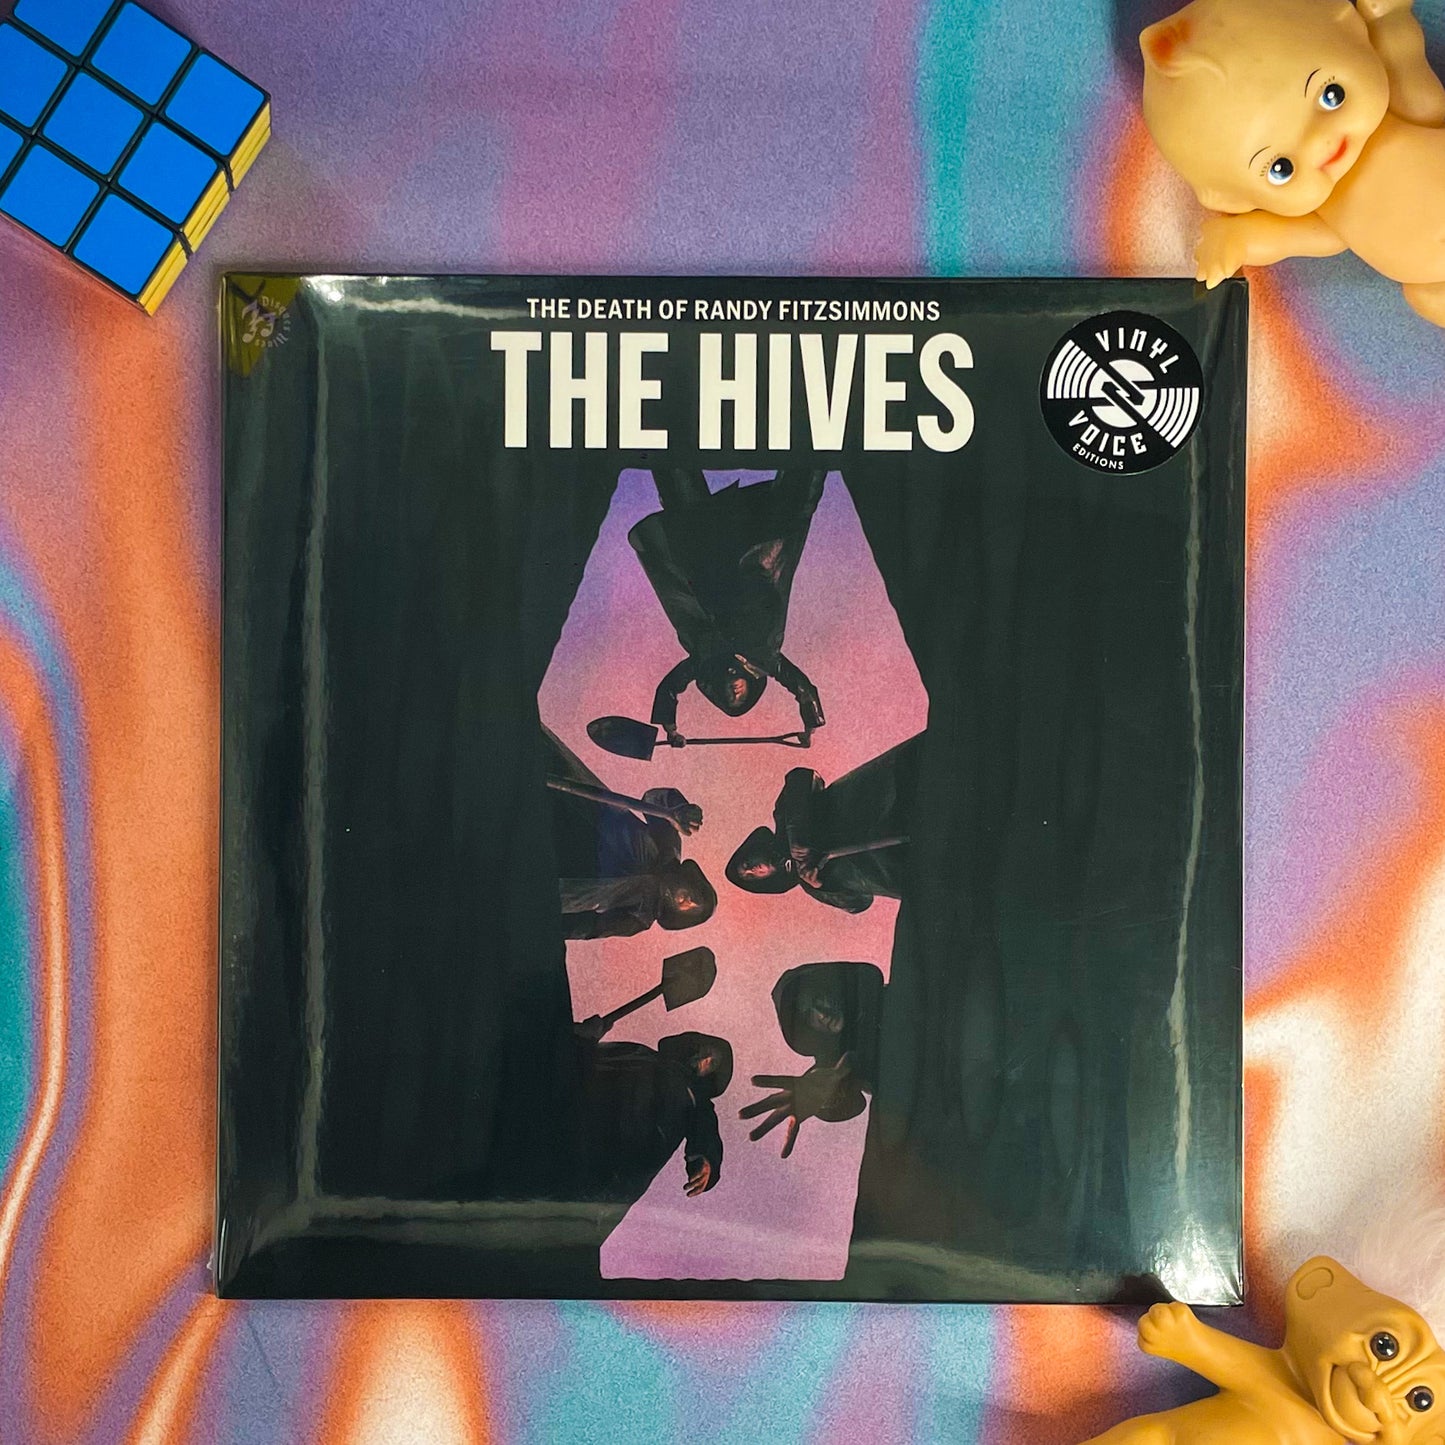 The Hives - The Death of Randy Fitzsimmons (indie)